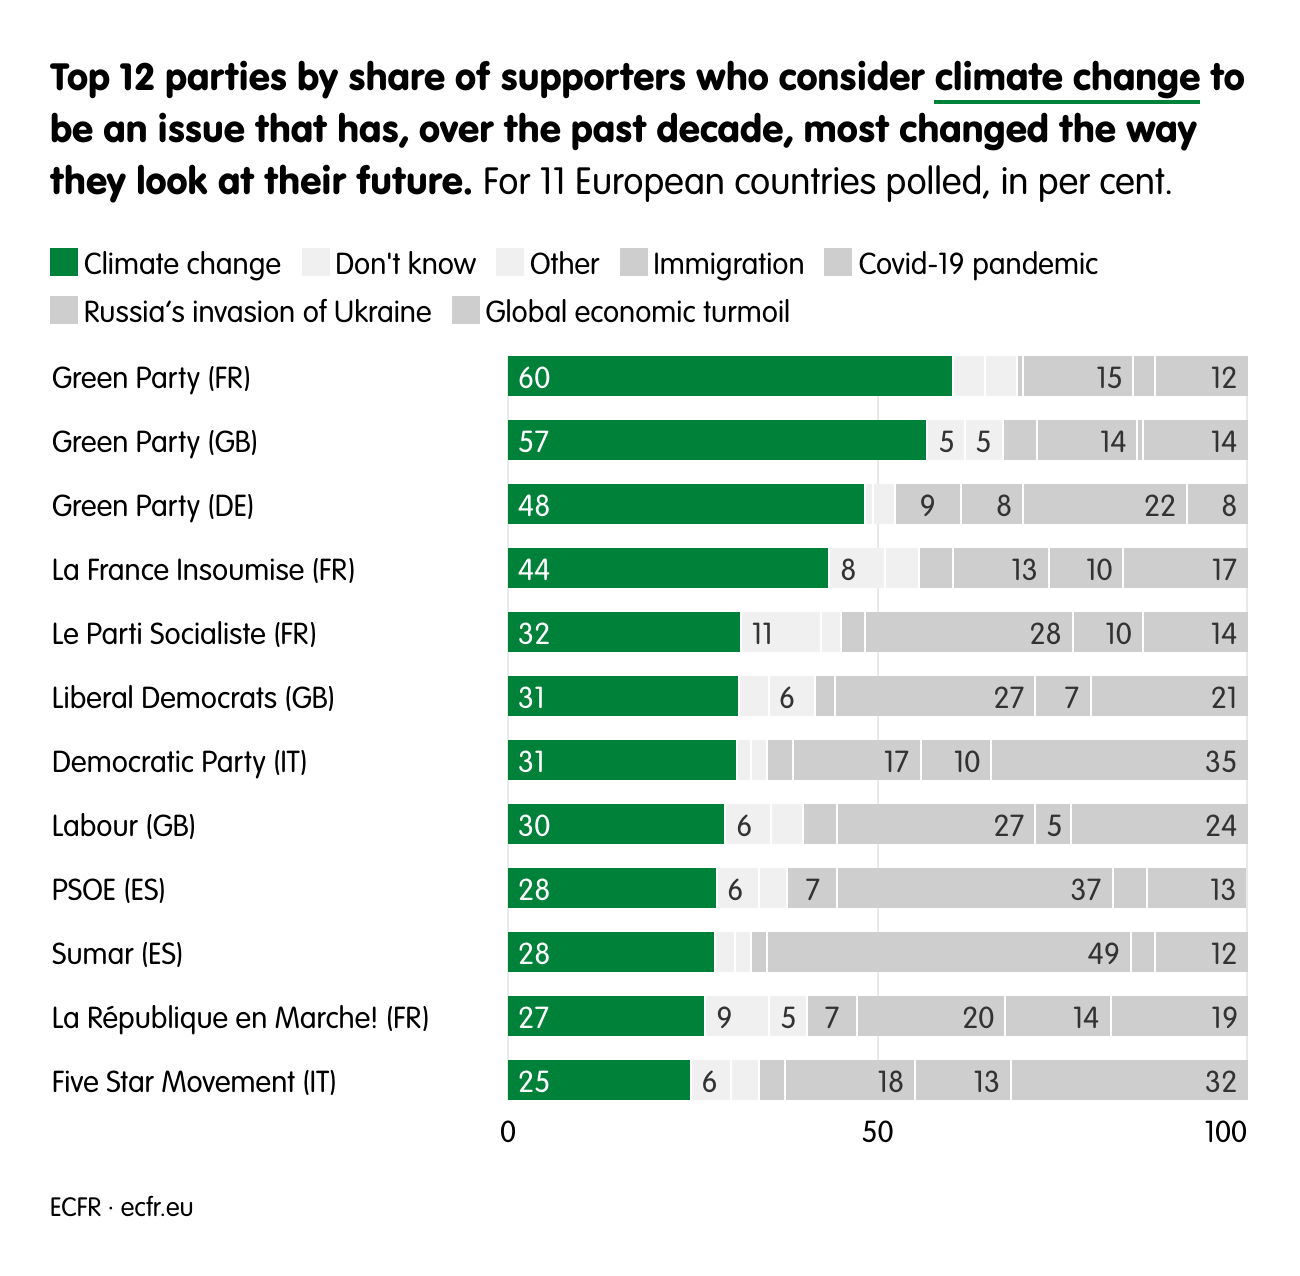 Top 12 parties by share of supporters who consider climate change to be an issue that has, over the past decade, most changed the way they look at their future.